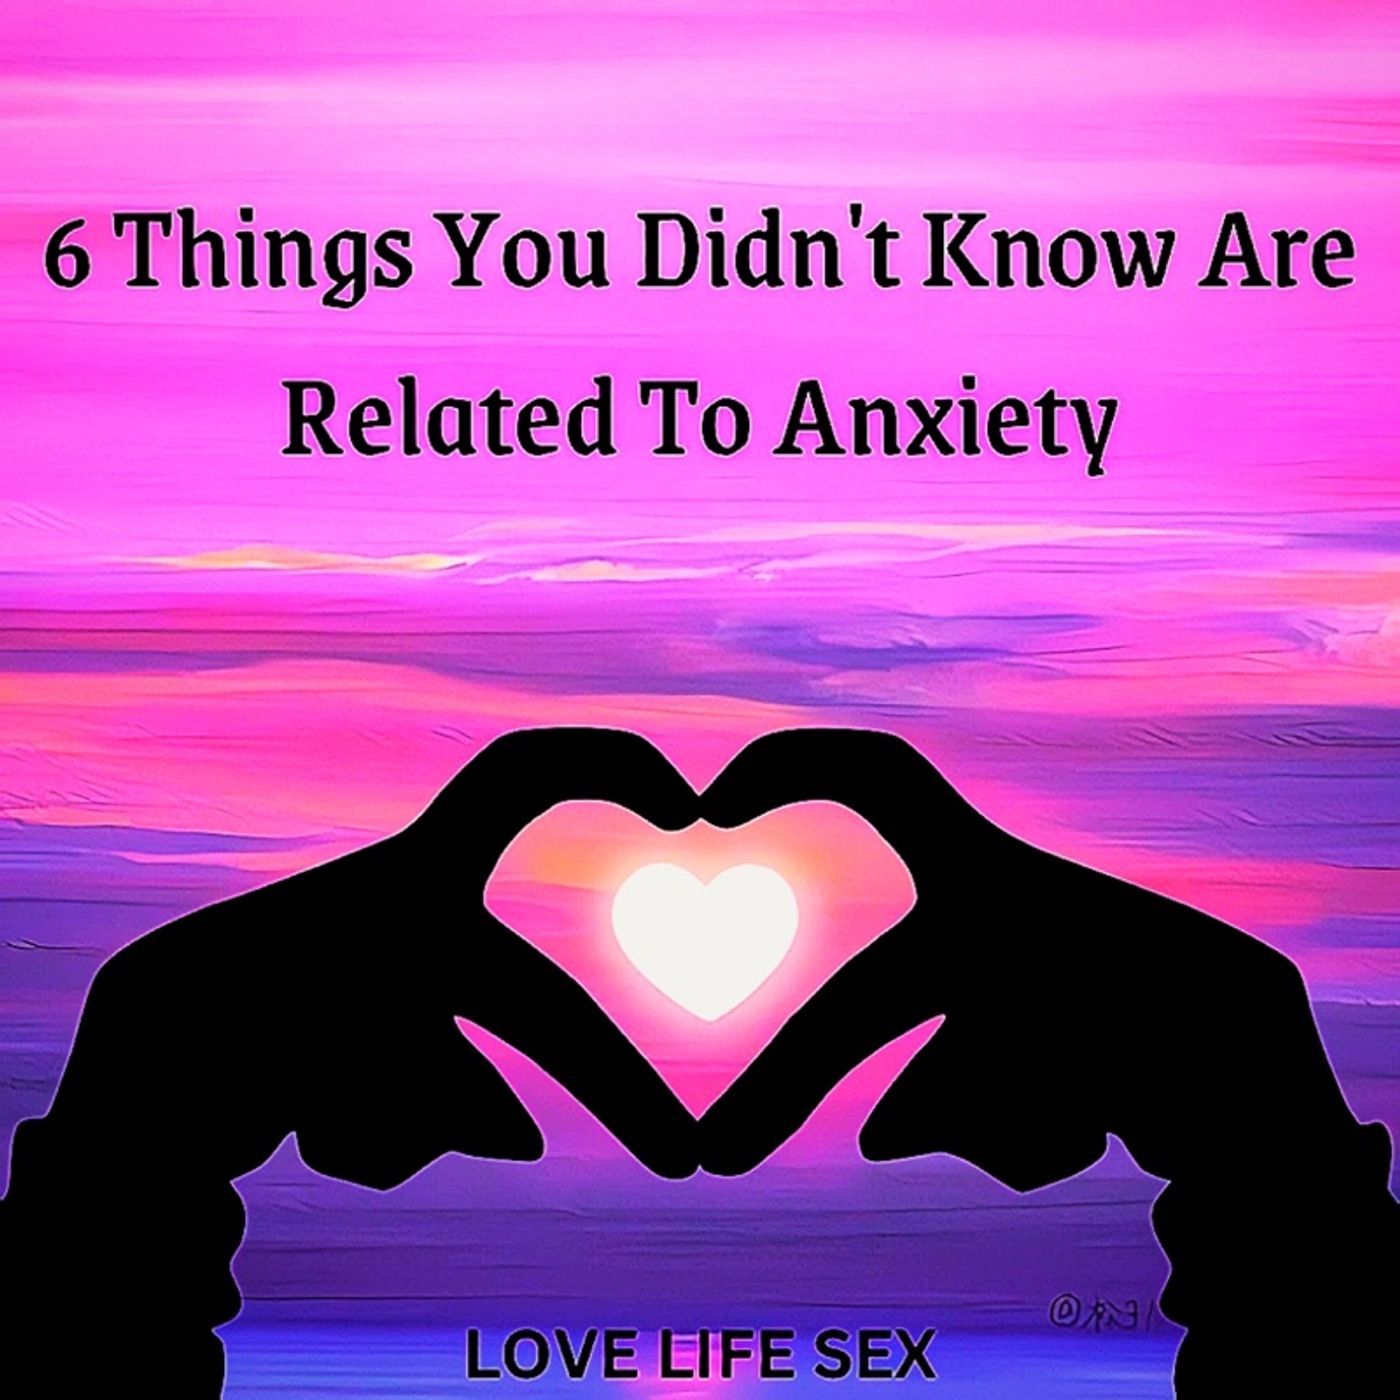 6 Things You Didn't Know Are Related To Anxiety 😥